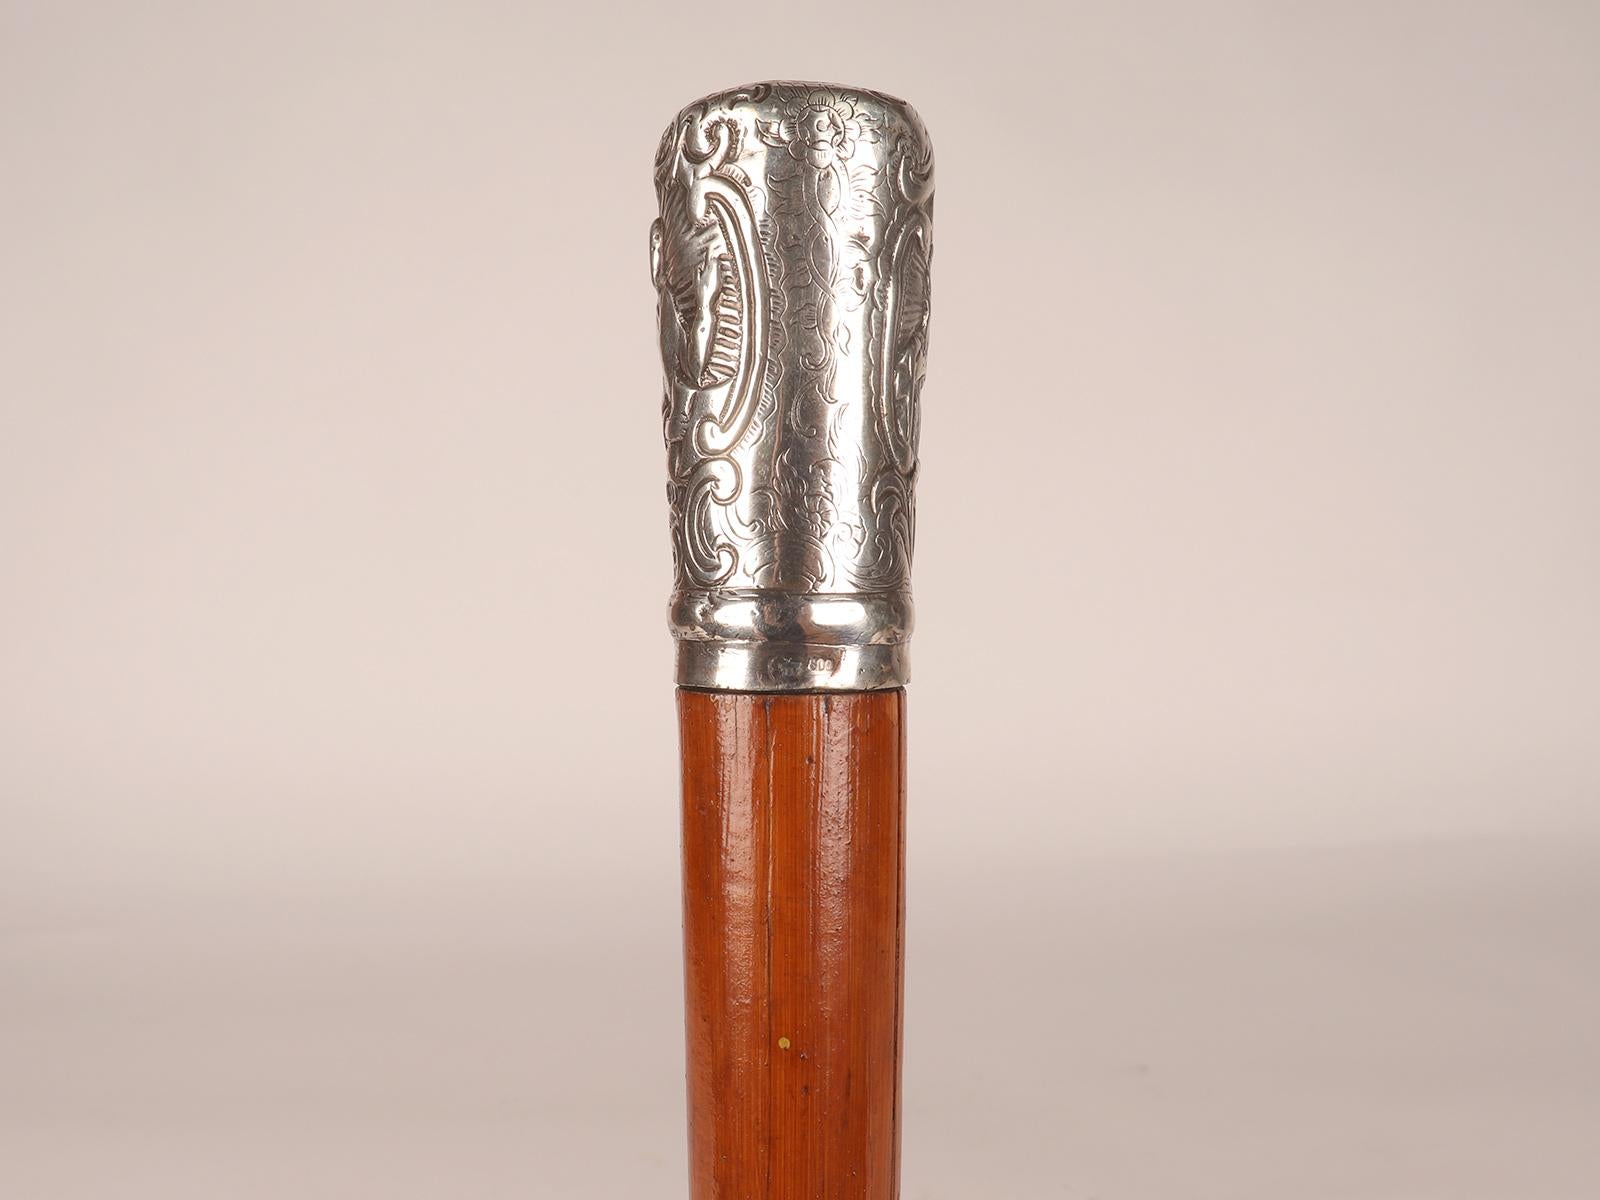 Customs officer's walking stick for goods inspection, Germany, 1870. For Sale 10